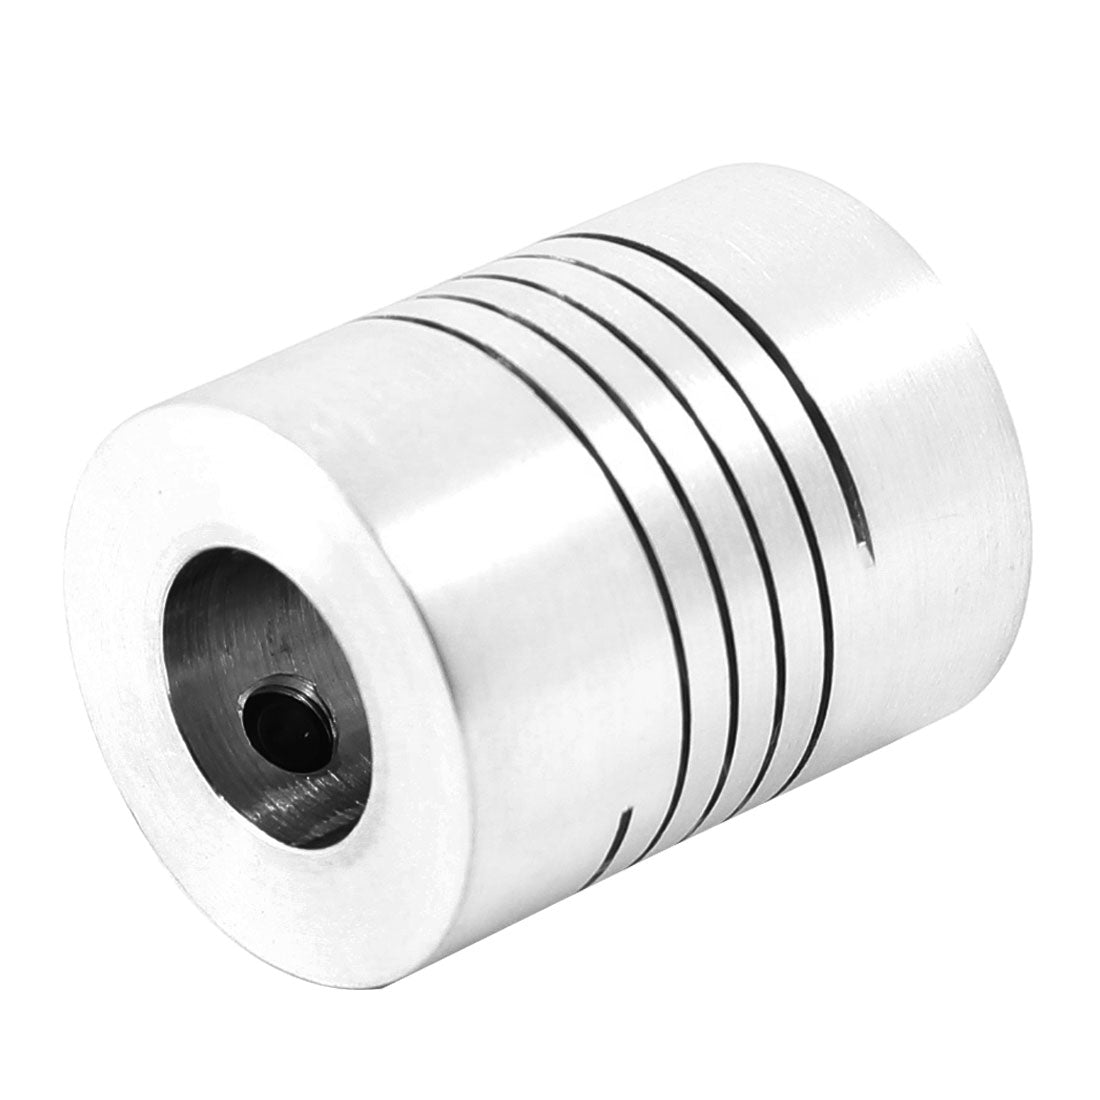 uxcell Uxcell 8mmx10mm D20L25 CNC Motor Shaft Coupler 8mm to 10mm Coupling